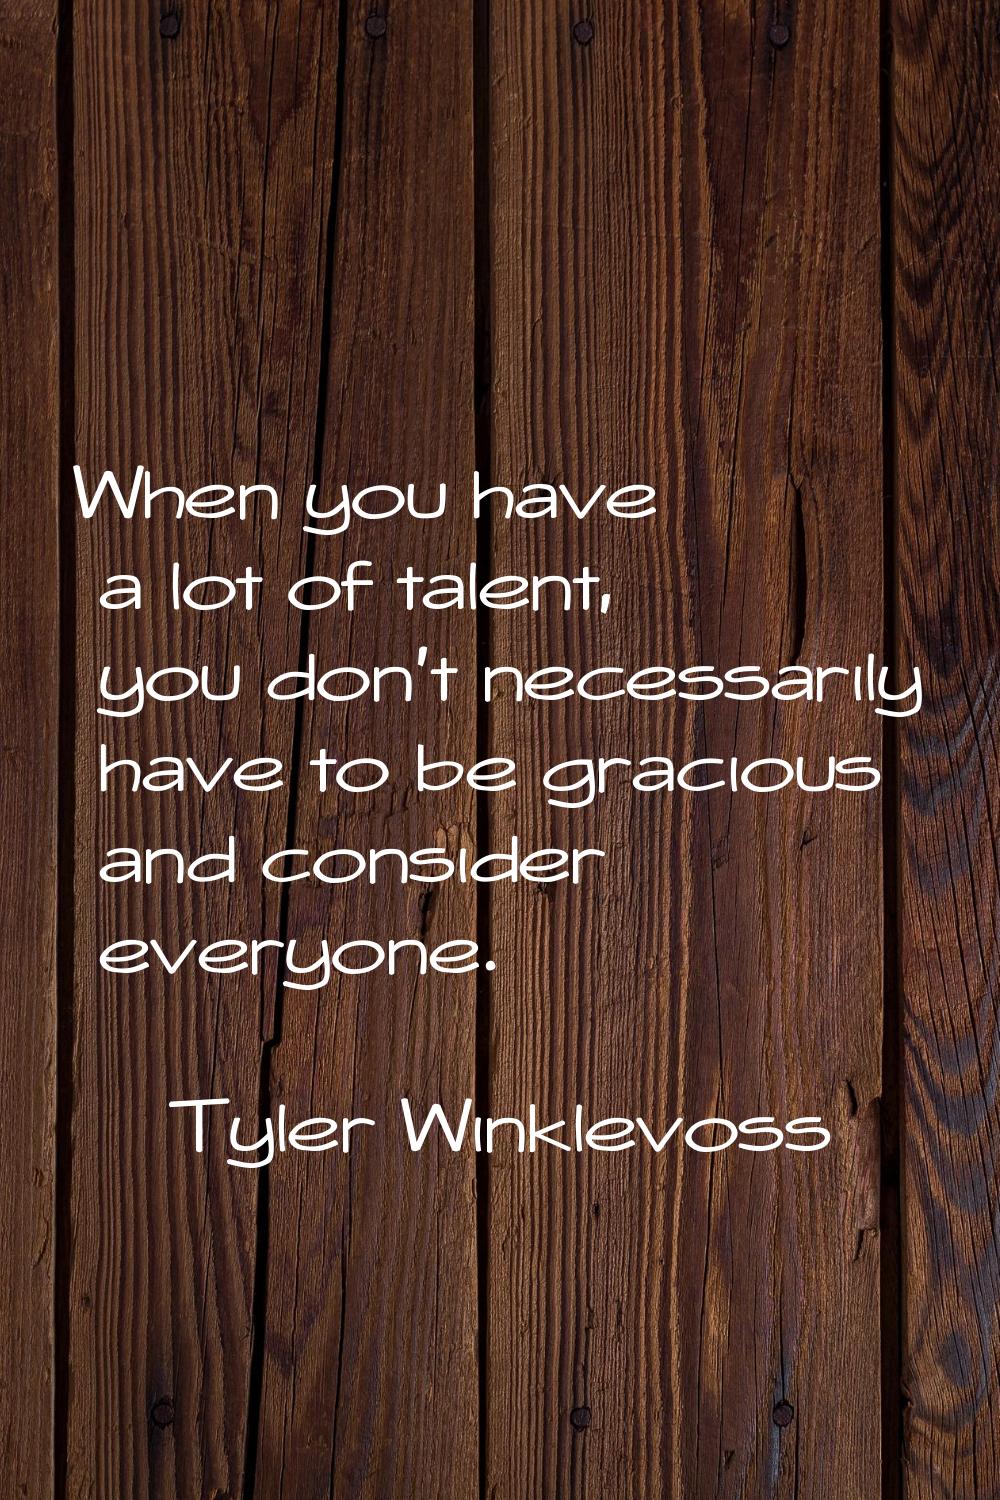 When you have a lot of talent, you don't necessarily have to be gracious and consider everyone.